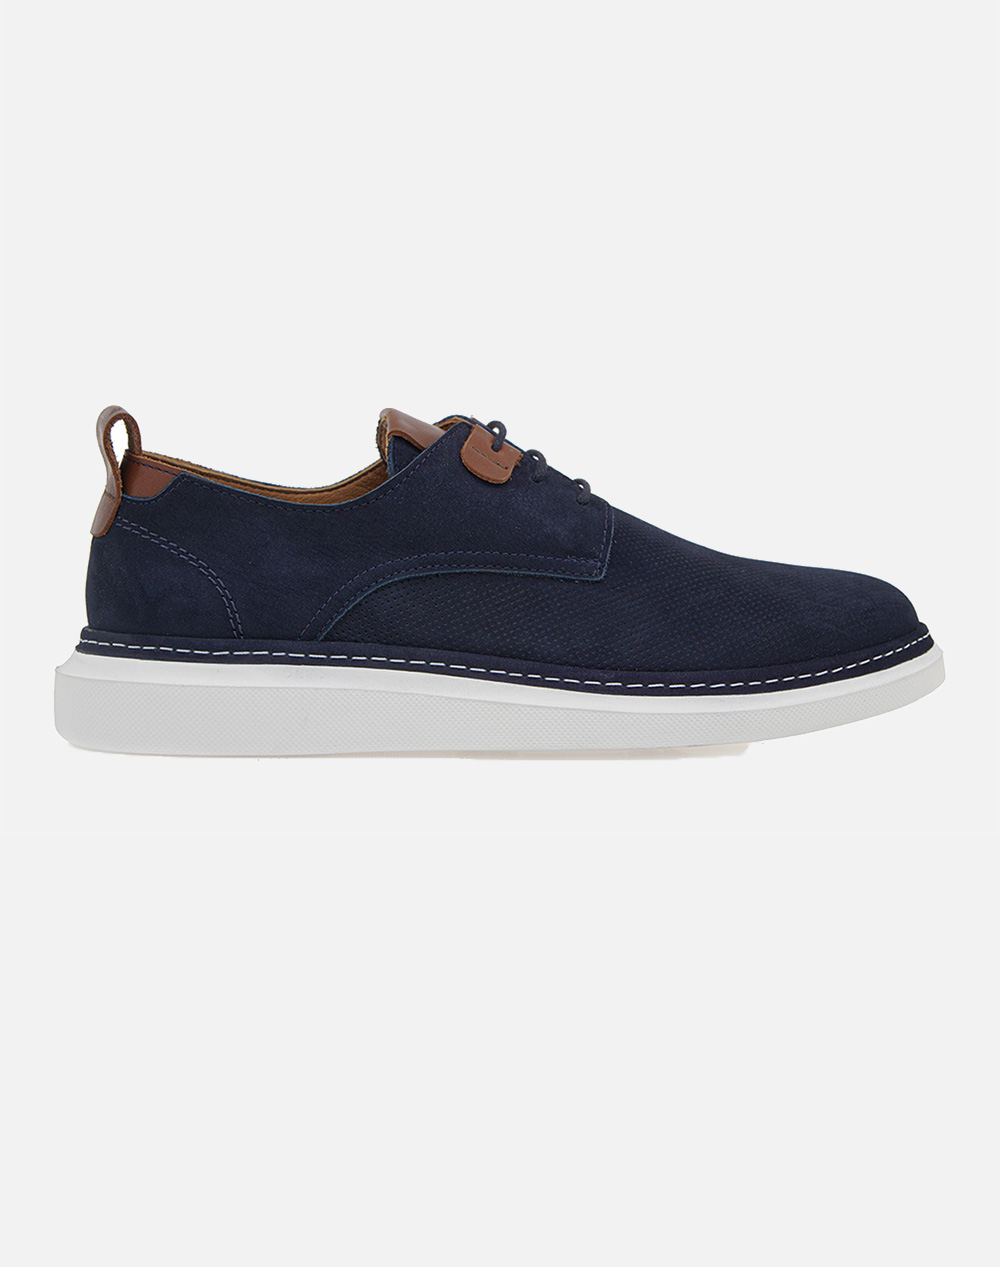 LORENZO RUSSO CASUAL S526S6442053-053 NavyBlue 3820PT-LR6040007_XR21187